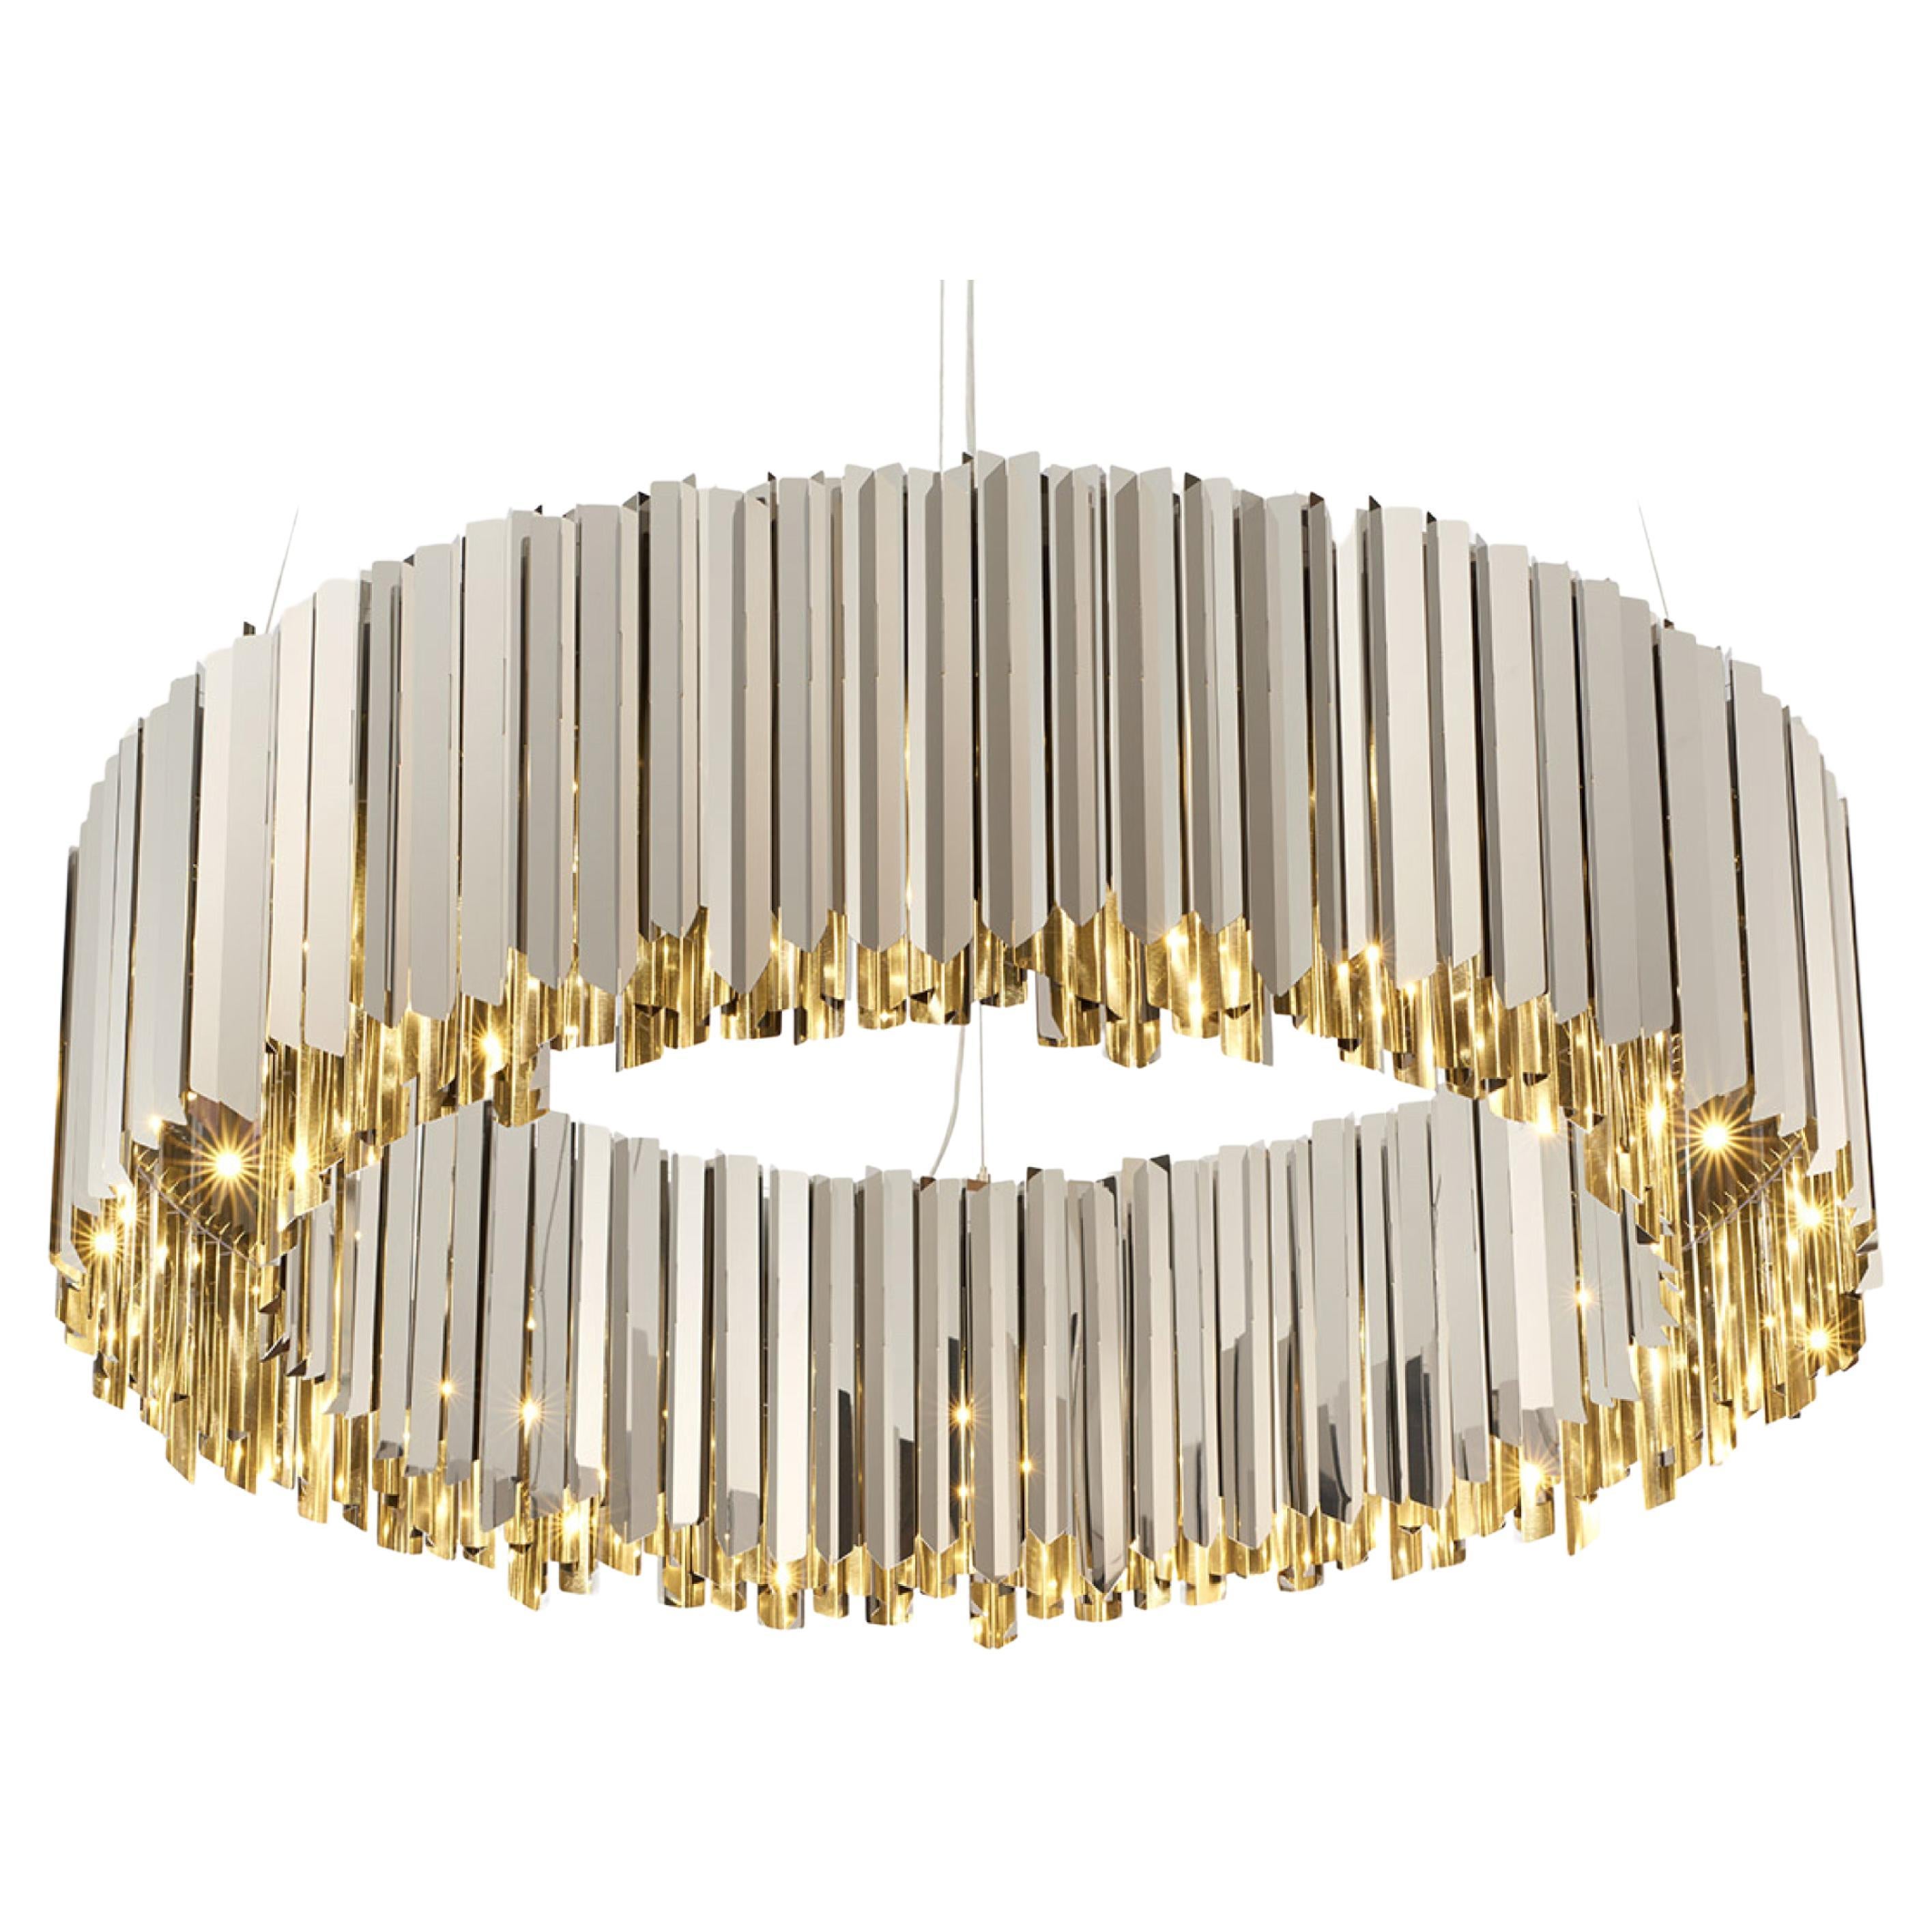 Facet Chandelier 700mm / 27.5" in Polished Stainless Steel by Tom Kirk UL Listed